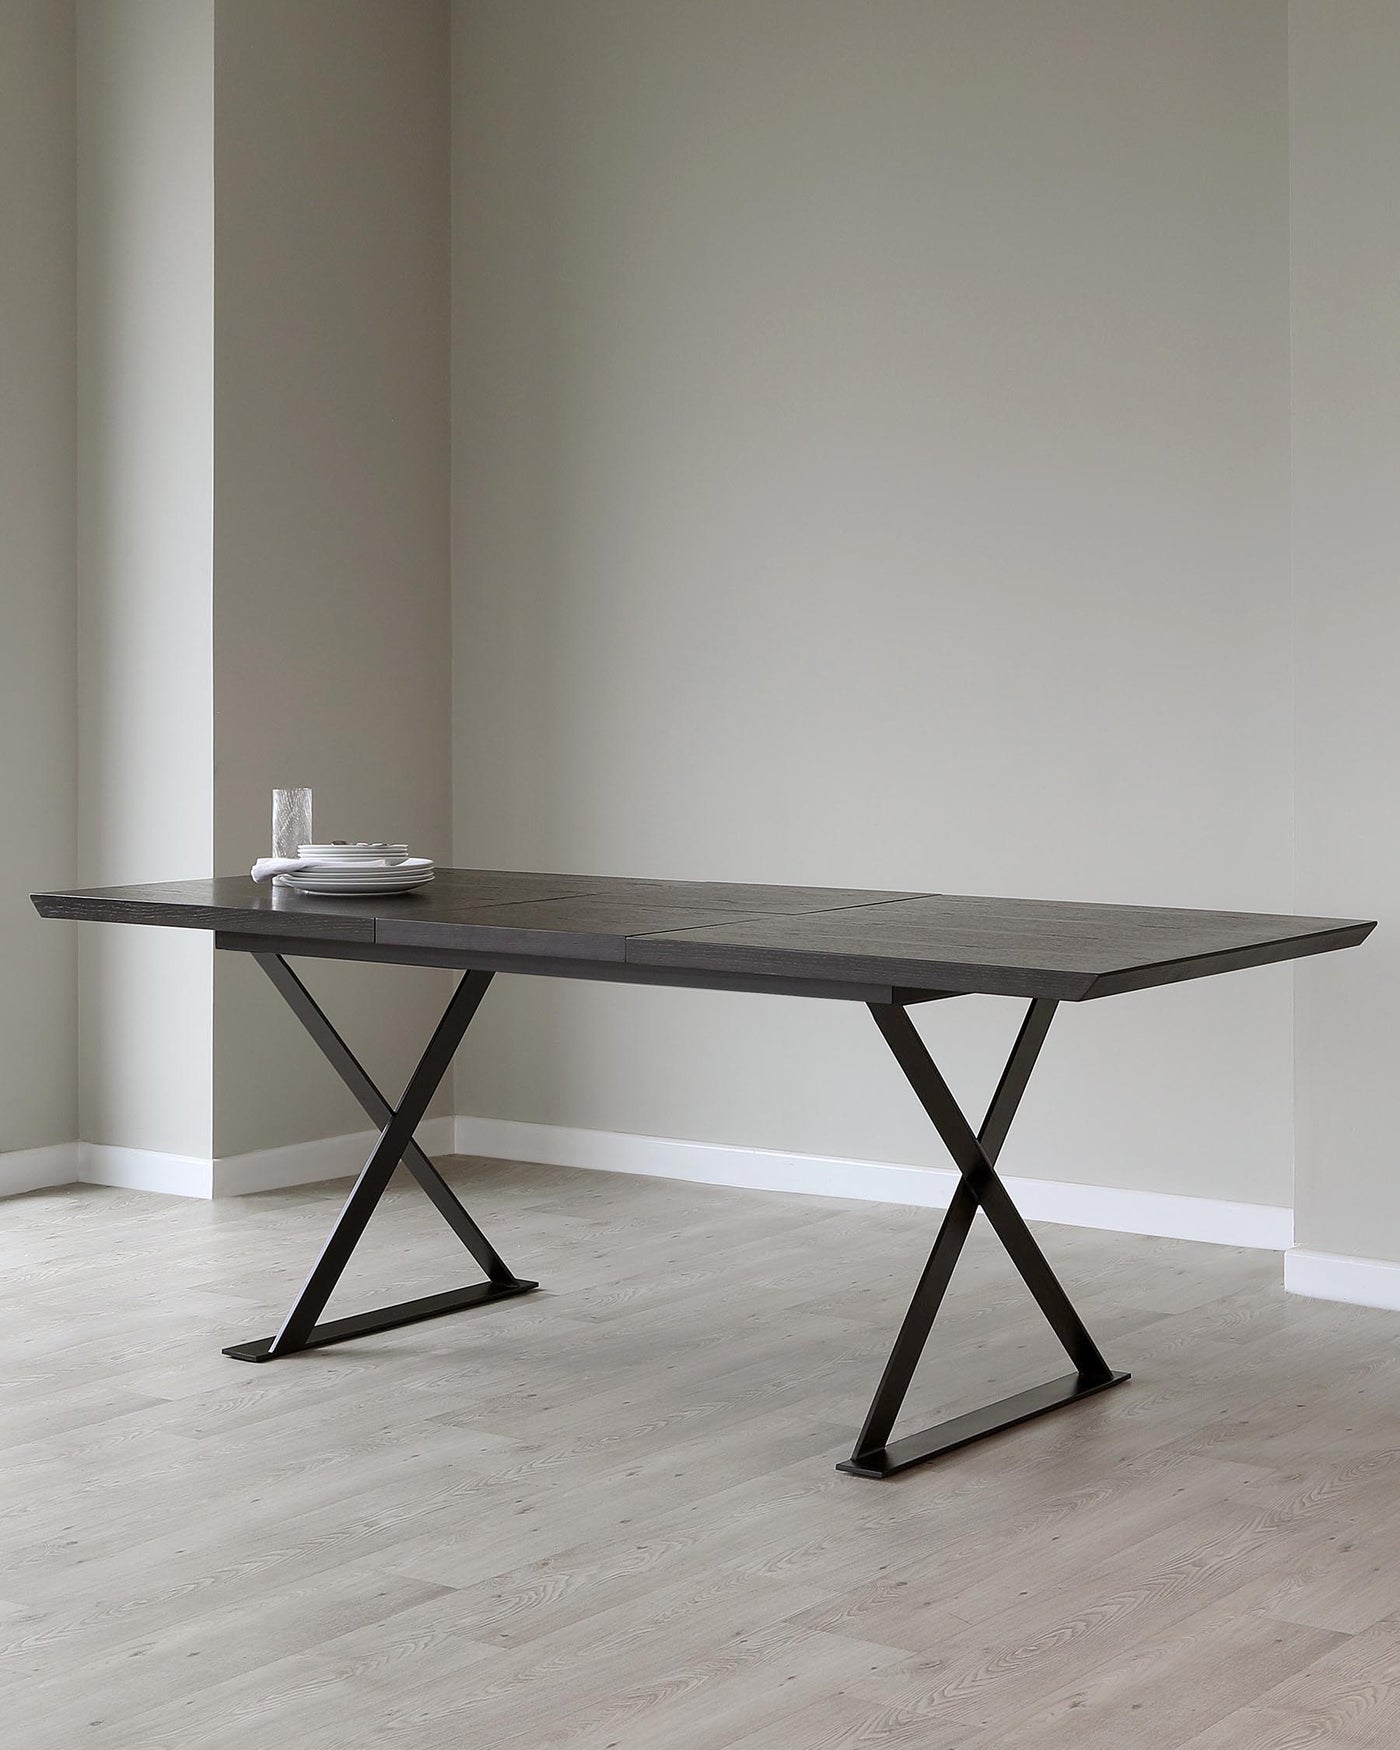 Modern minimalist dining table with a dark wood finish and distinctive X-shaped metal legs in a minimalist interior.